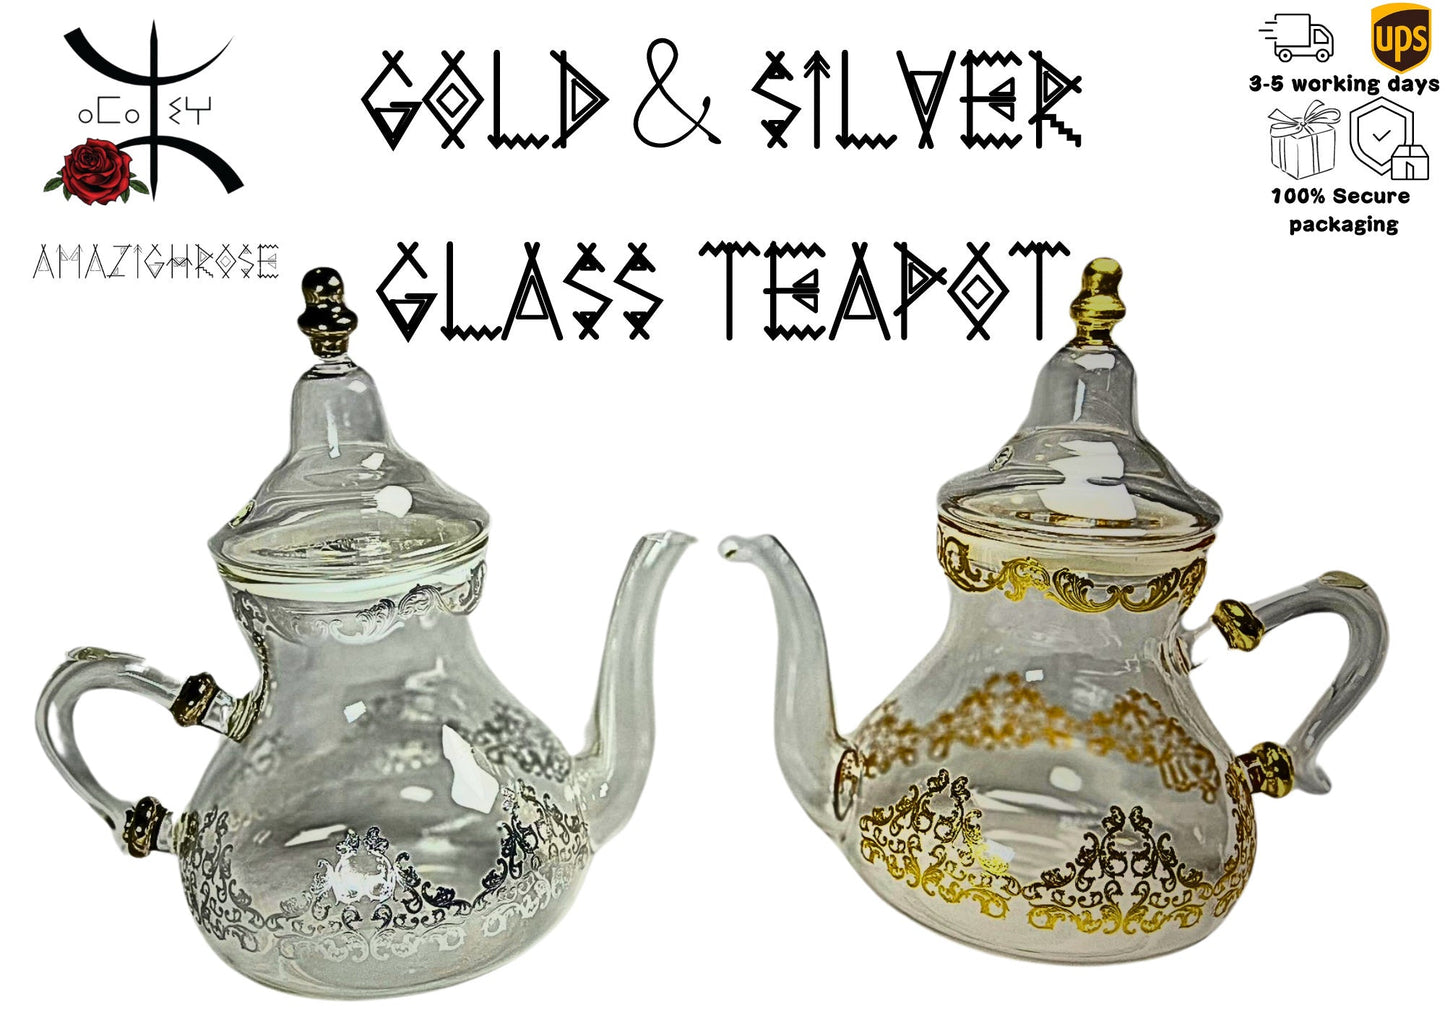 Amazighrose handmade large Glass Teapot with golden or Silver details - Amazighrose